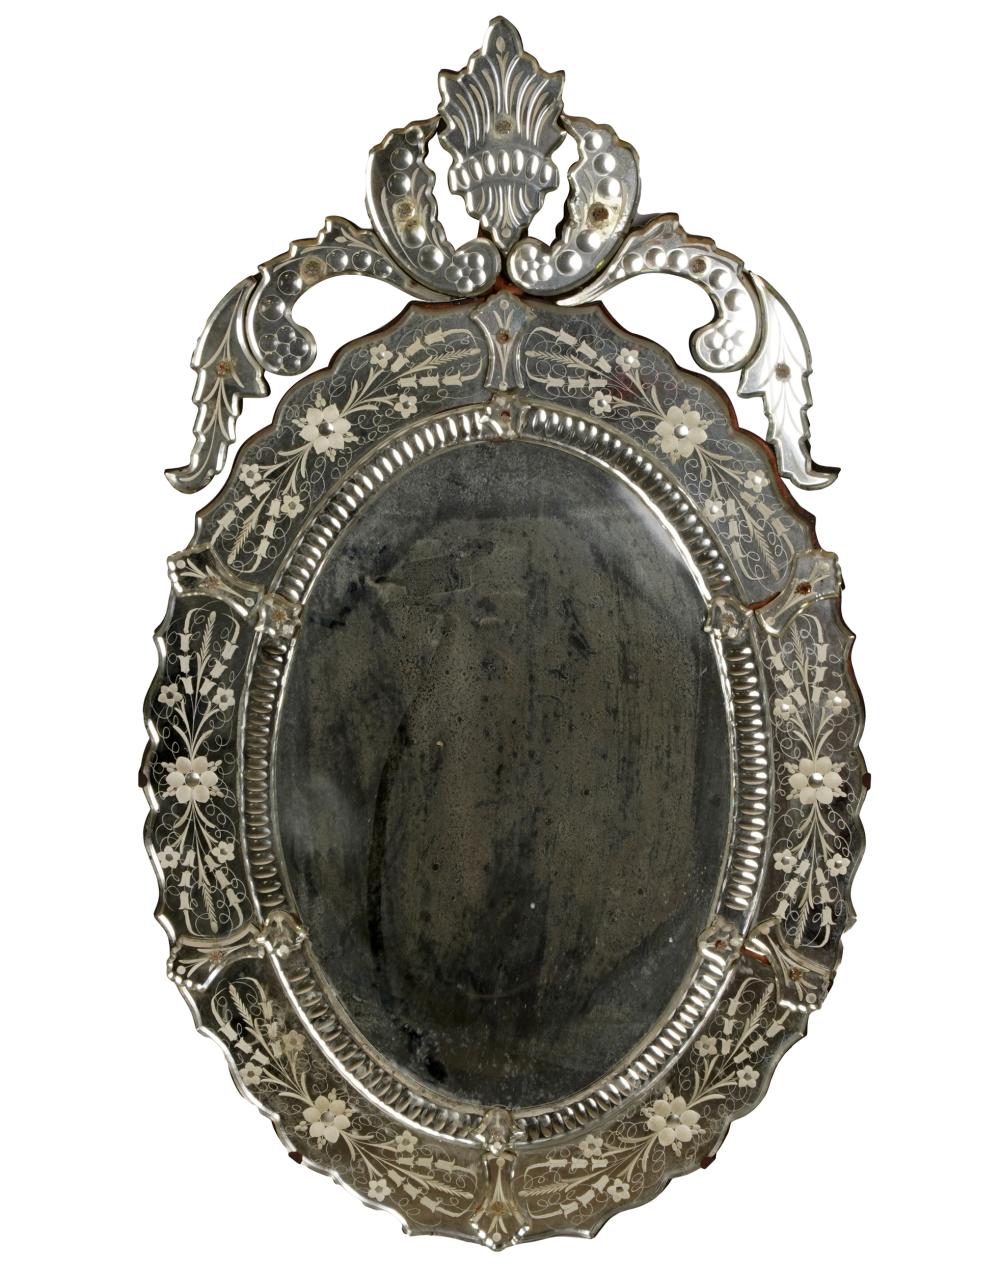 VENETIAN ETCHED GLASS MIRRORwith oval